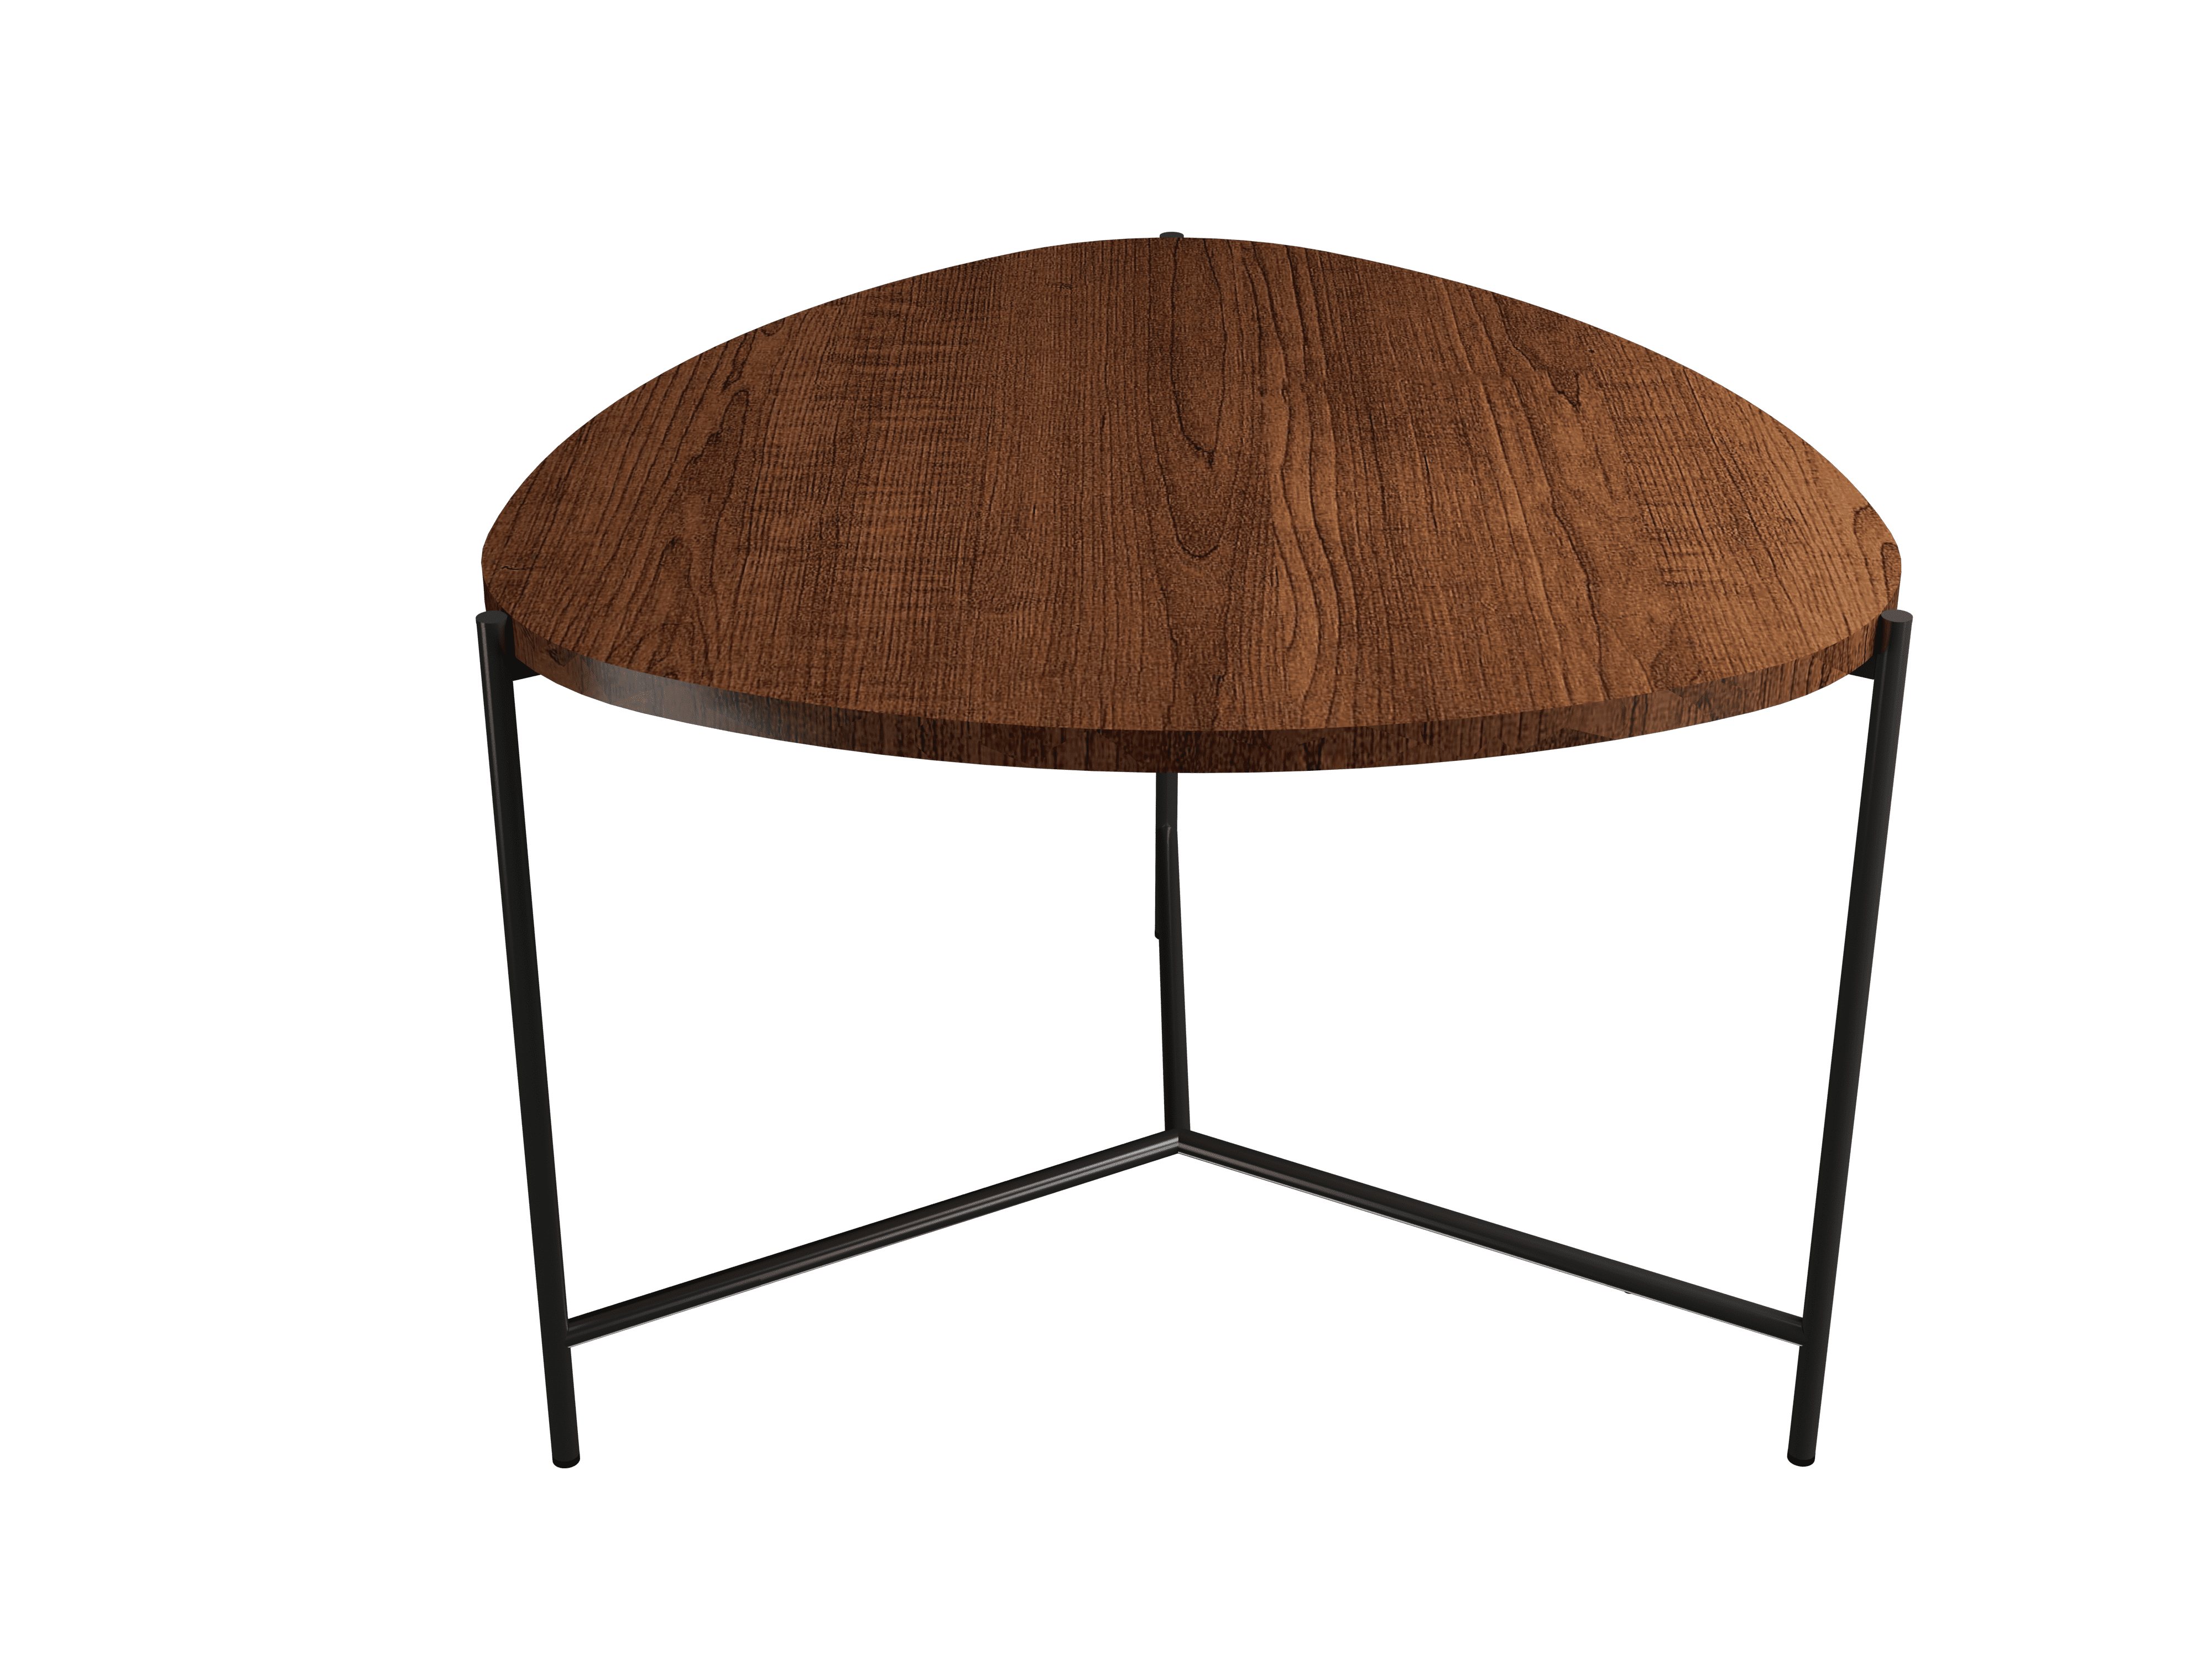 Coffee Tables Lamp Clean F1034 - Clean Line Accord Lighting | 06. Imbuia